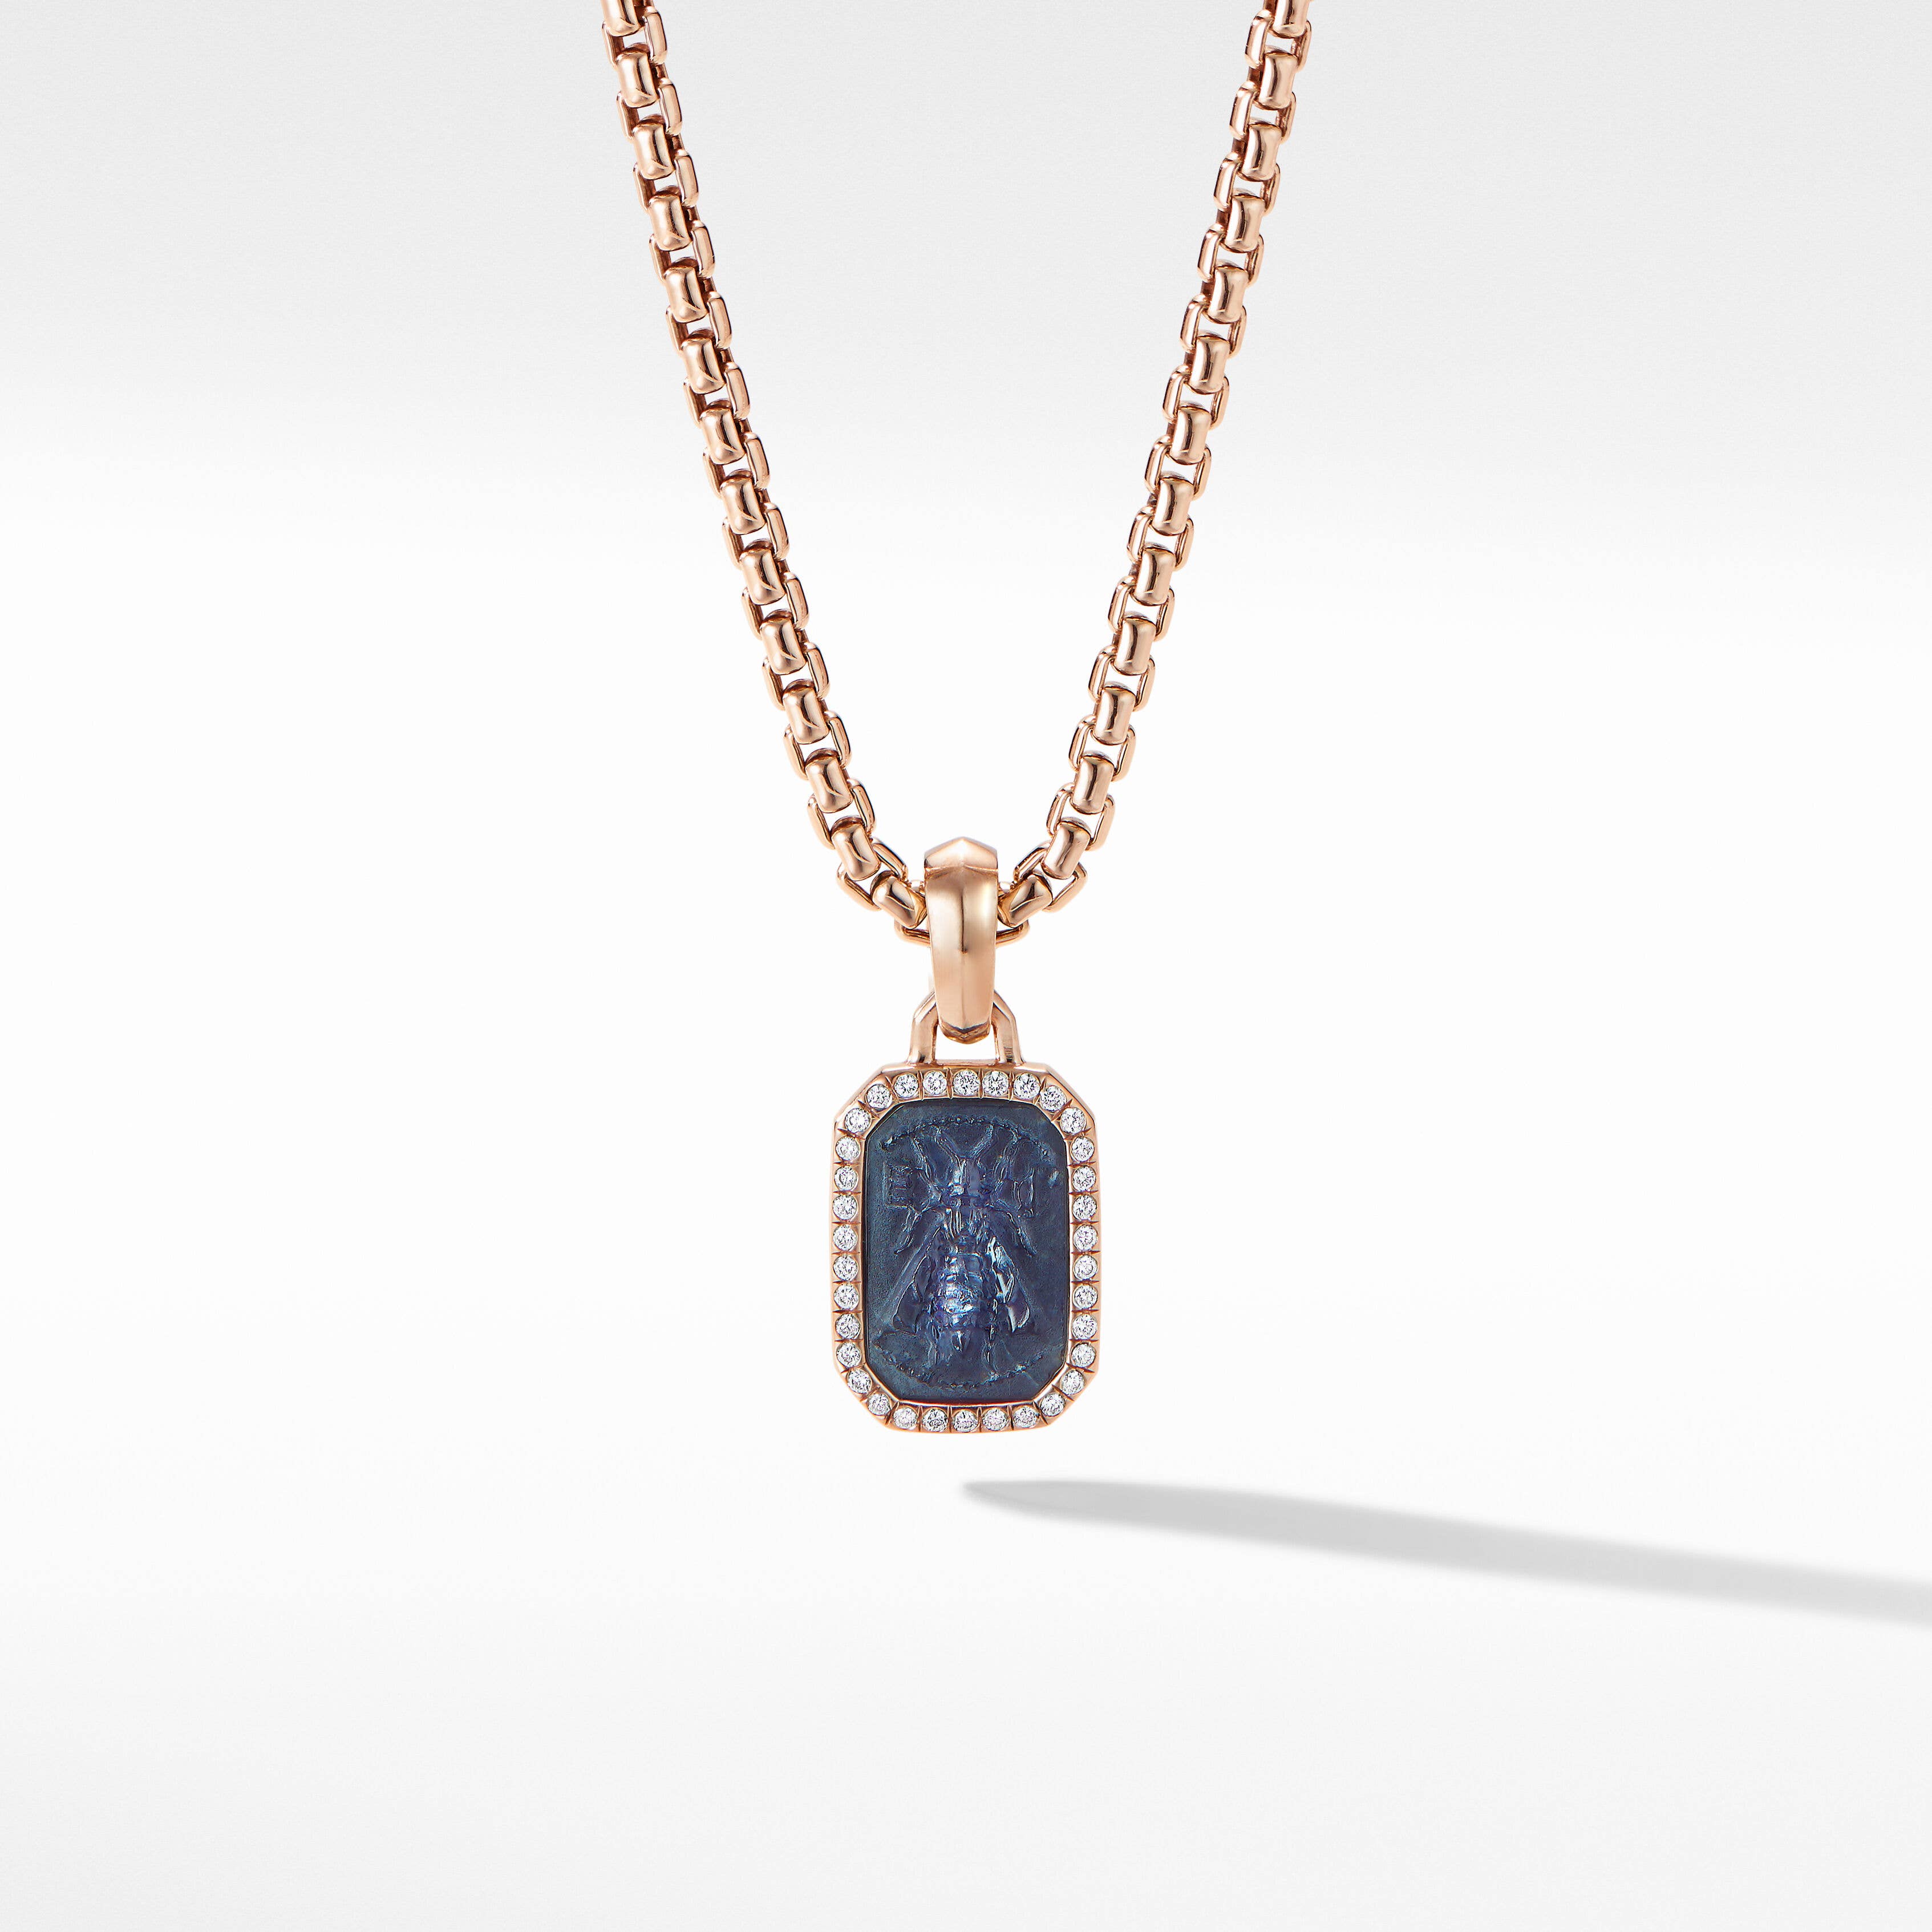 Petrvs® Bee Amulet in 18K Rose Gold with Iolite and Pavé Diamonds